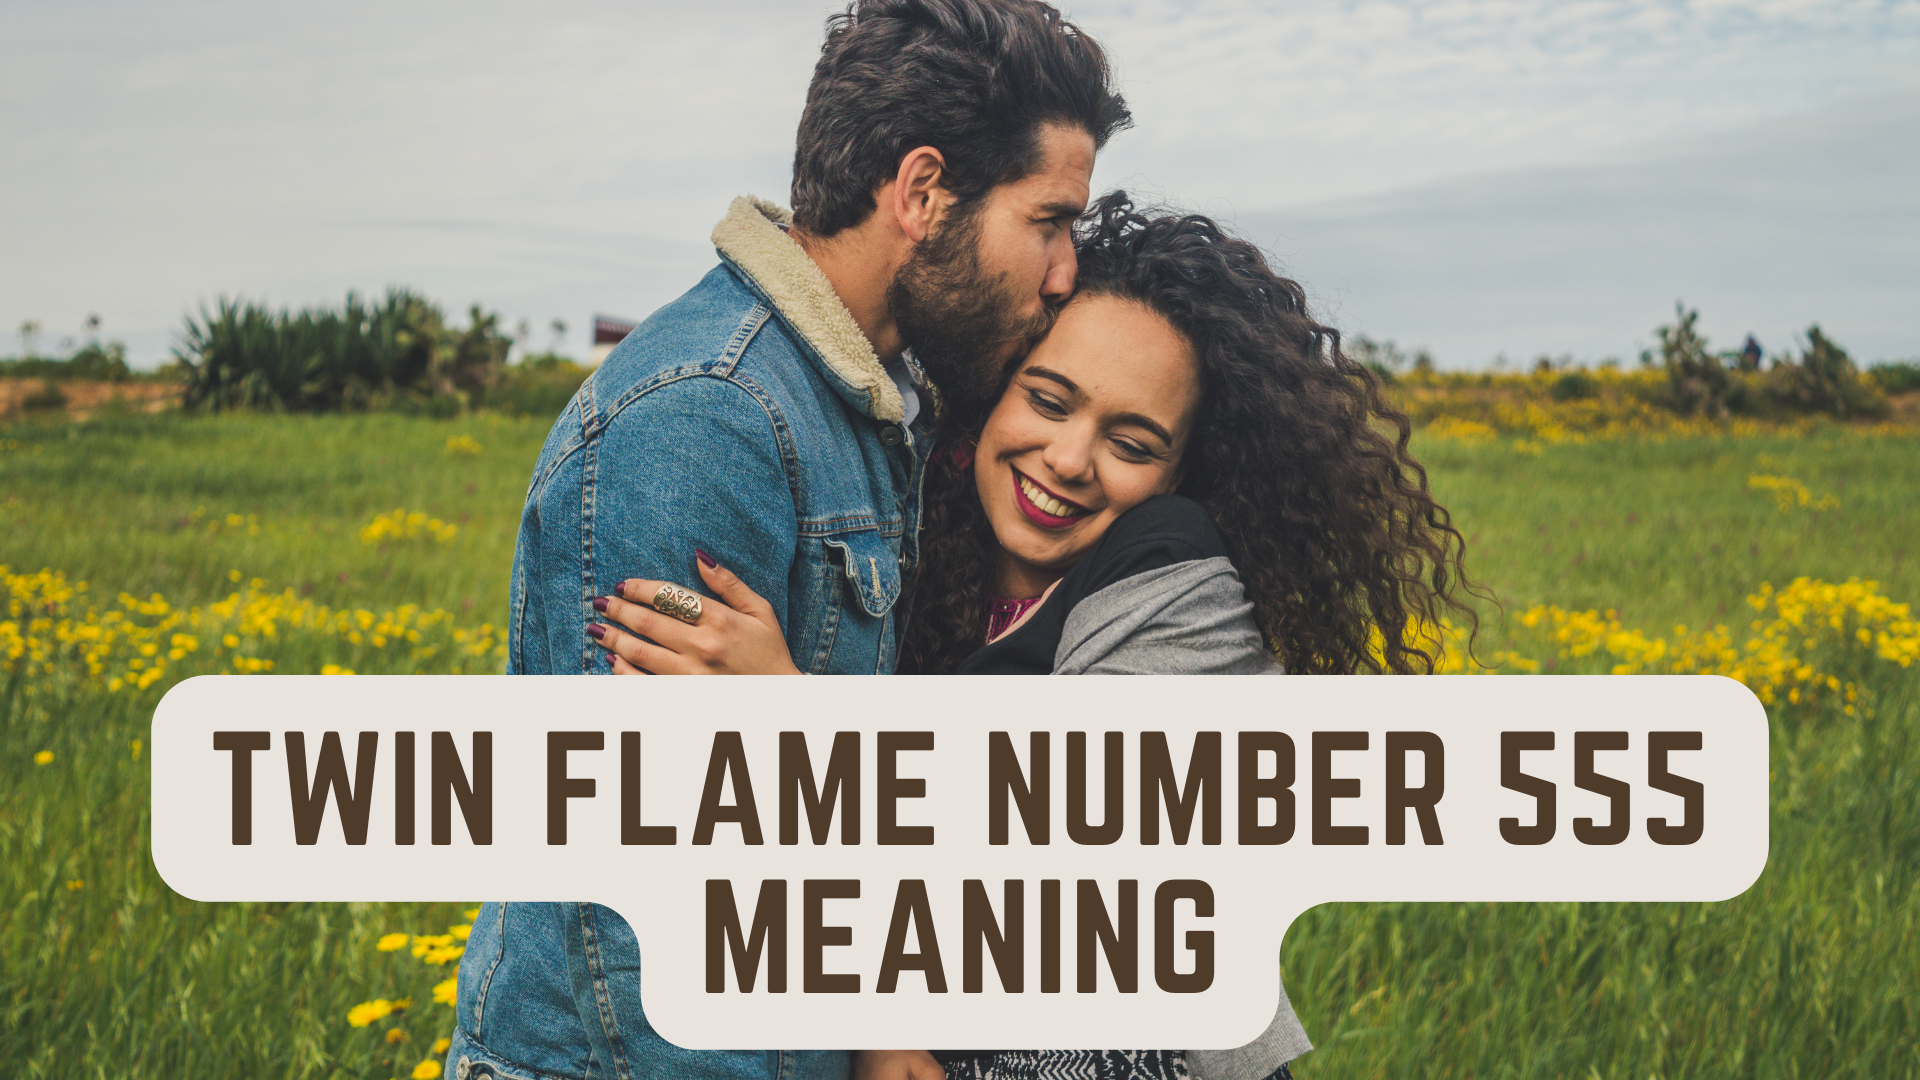 A couple hugging each other while in the field with words Twin Flame Number 555 Meaning